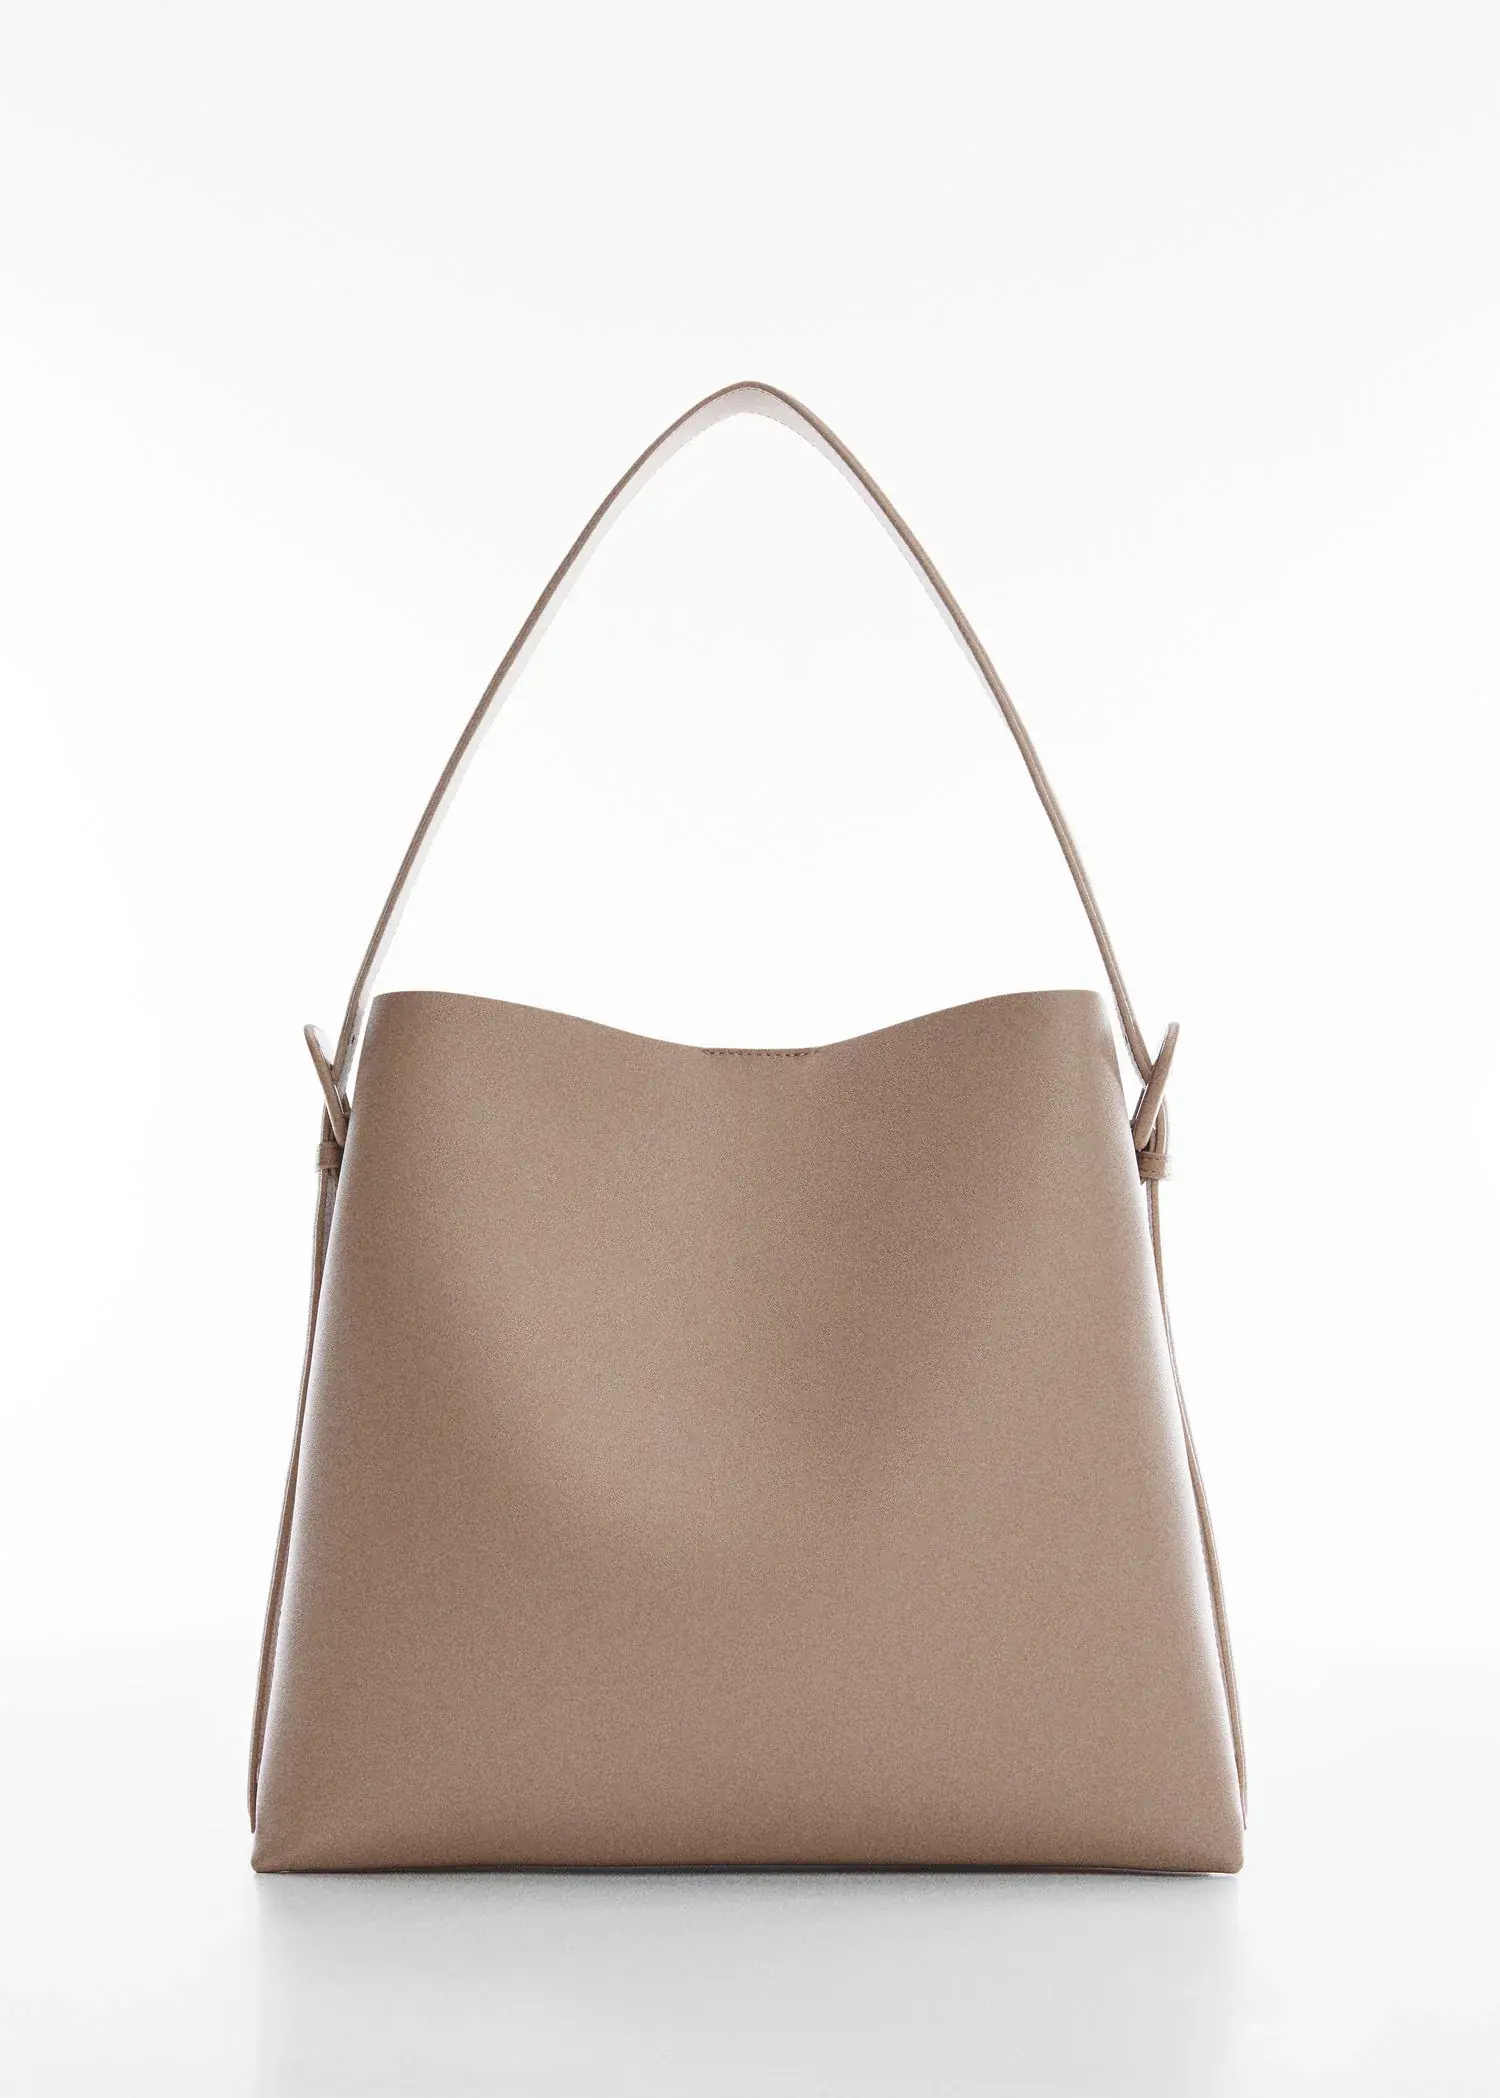 Mango Shopper bag with buckle. a tan purse is shown on a white background. 